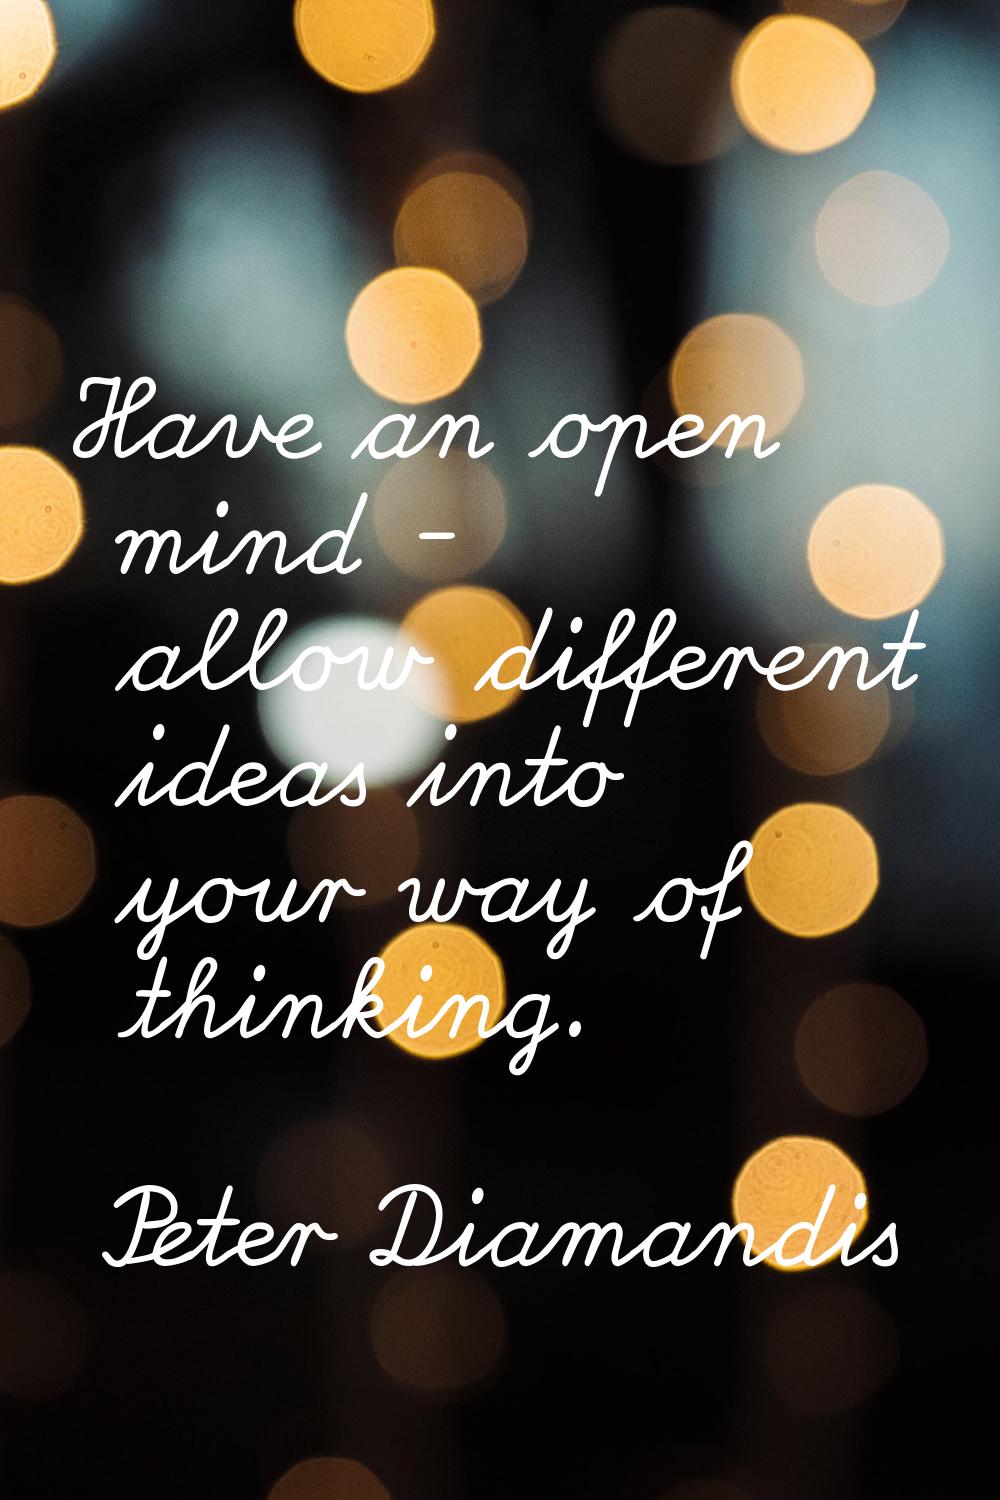 Have an open mind - allow different ideas into your way of thinking.